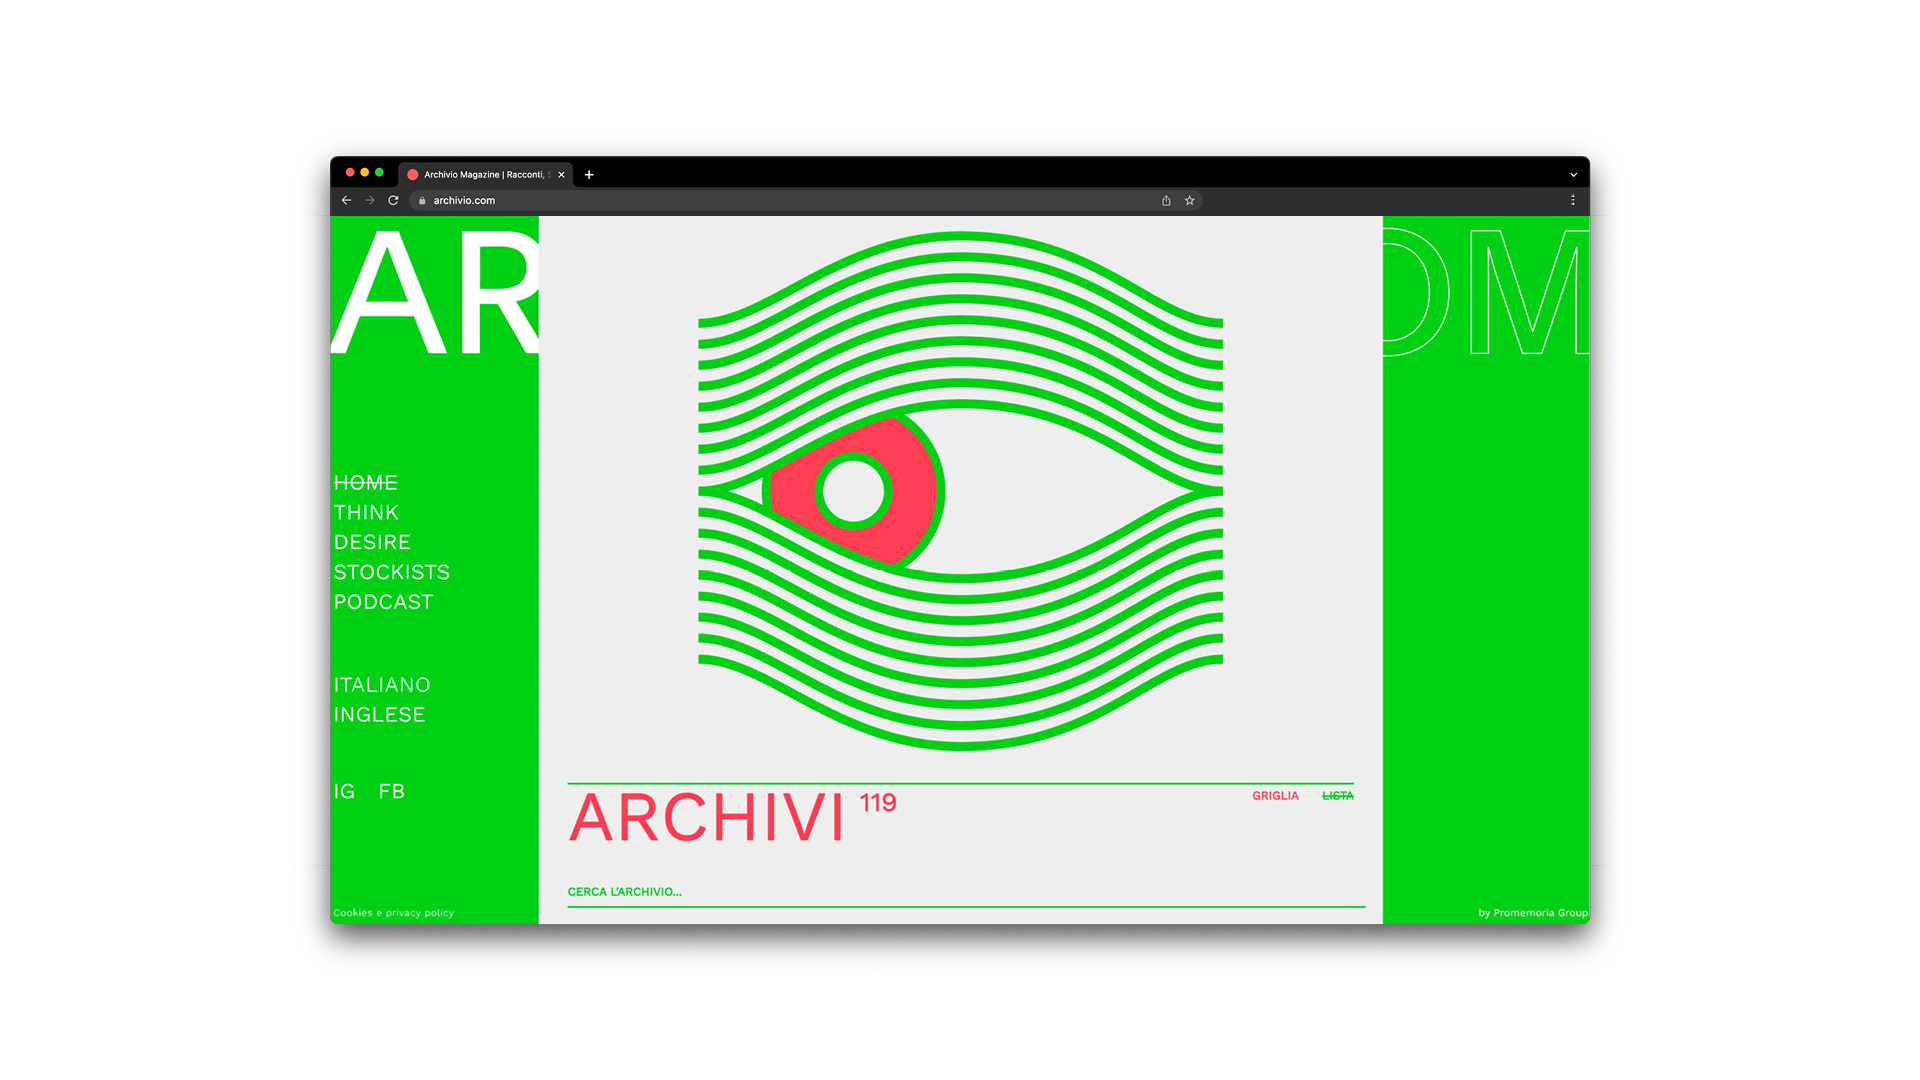 The interactive eye of archivio.com with the colours of issue 6 of the magazine Archivio